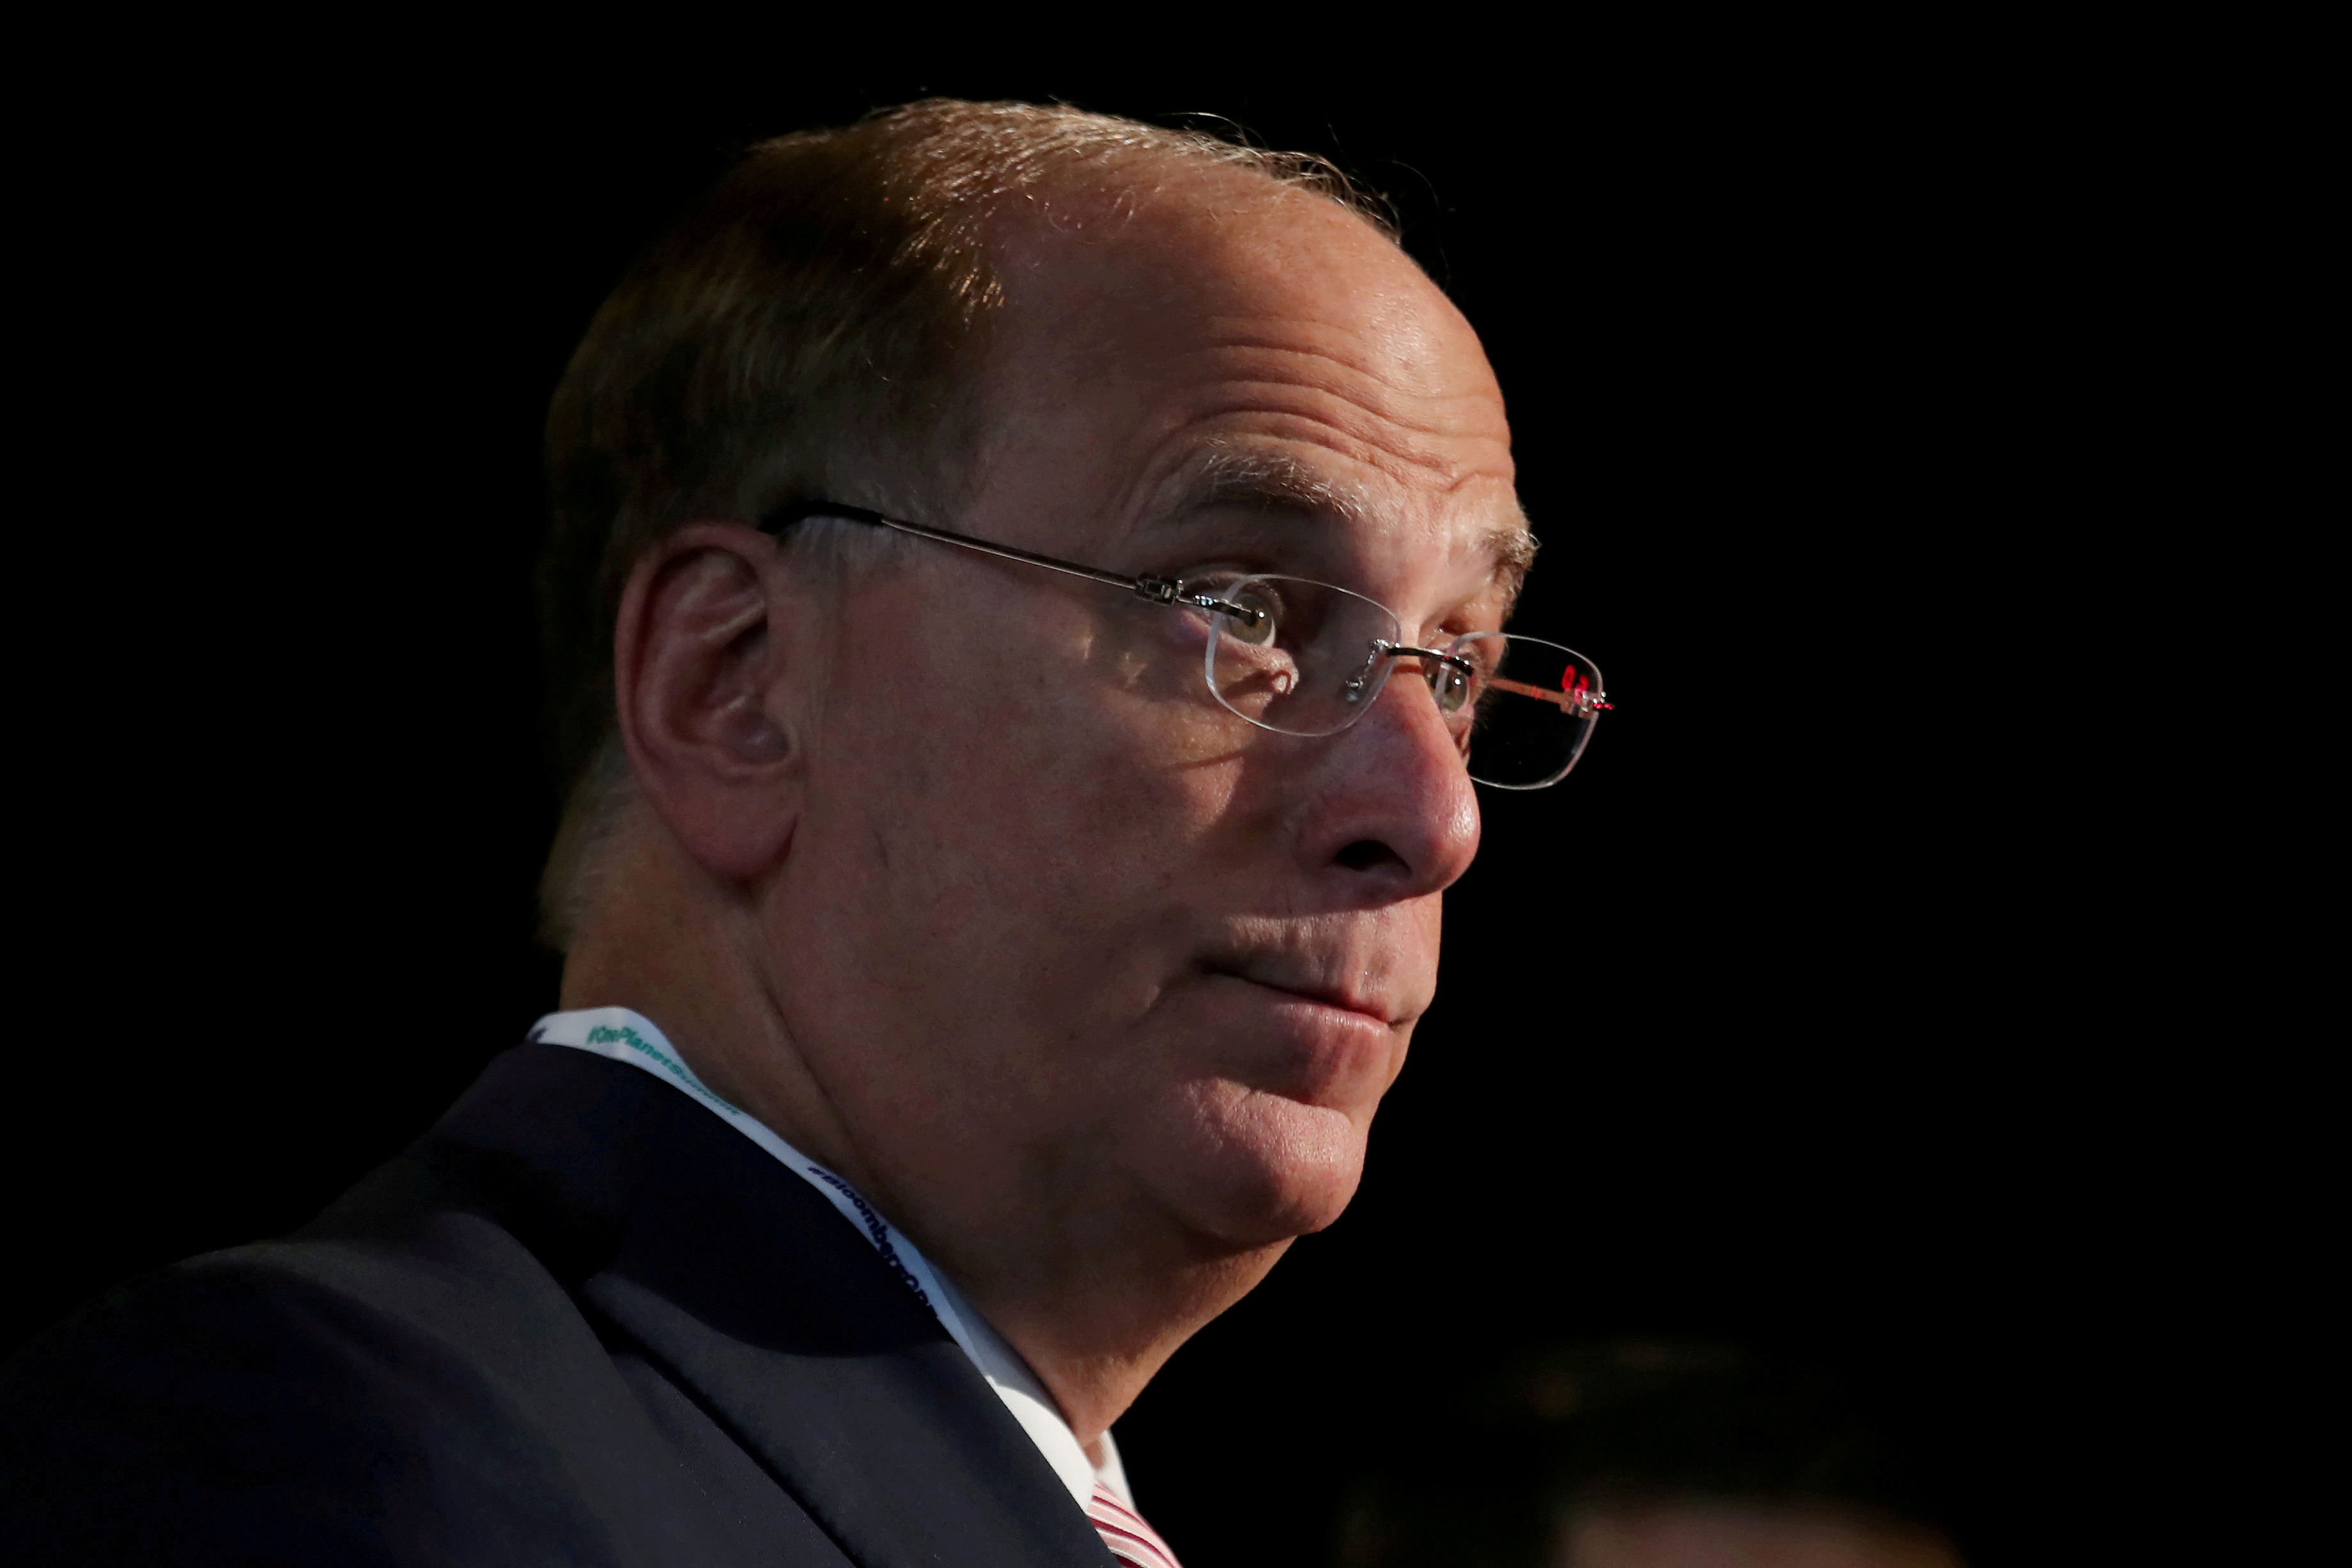 FILE PHOTO: Larry Fink, Chief Executive Officer of BlackRock, stands at the Bloomberg Global Business forum in New York